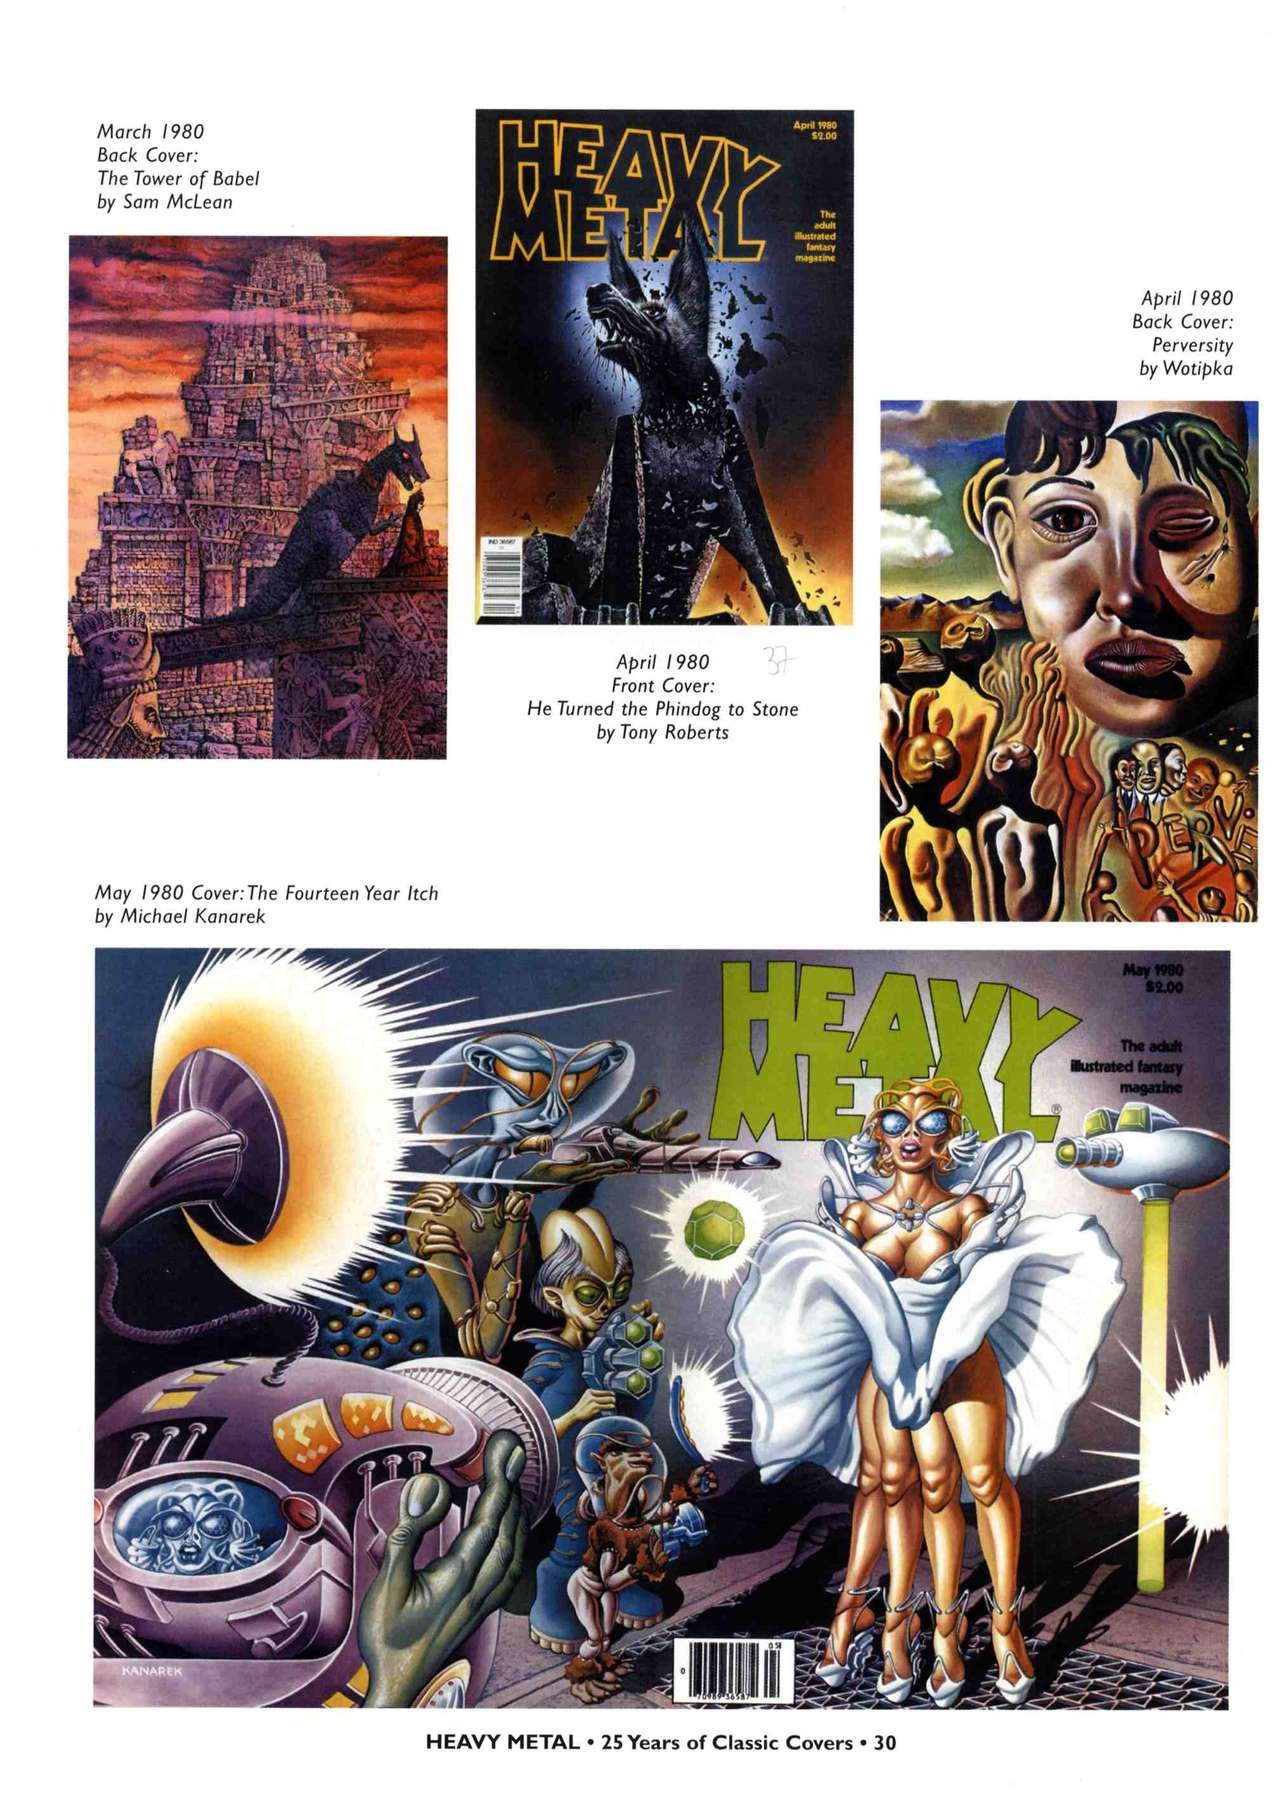 HEAVY METAL 25 Years of Classic Covers 35